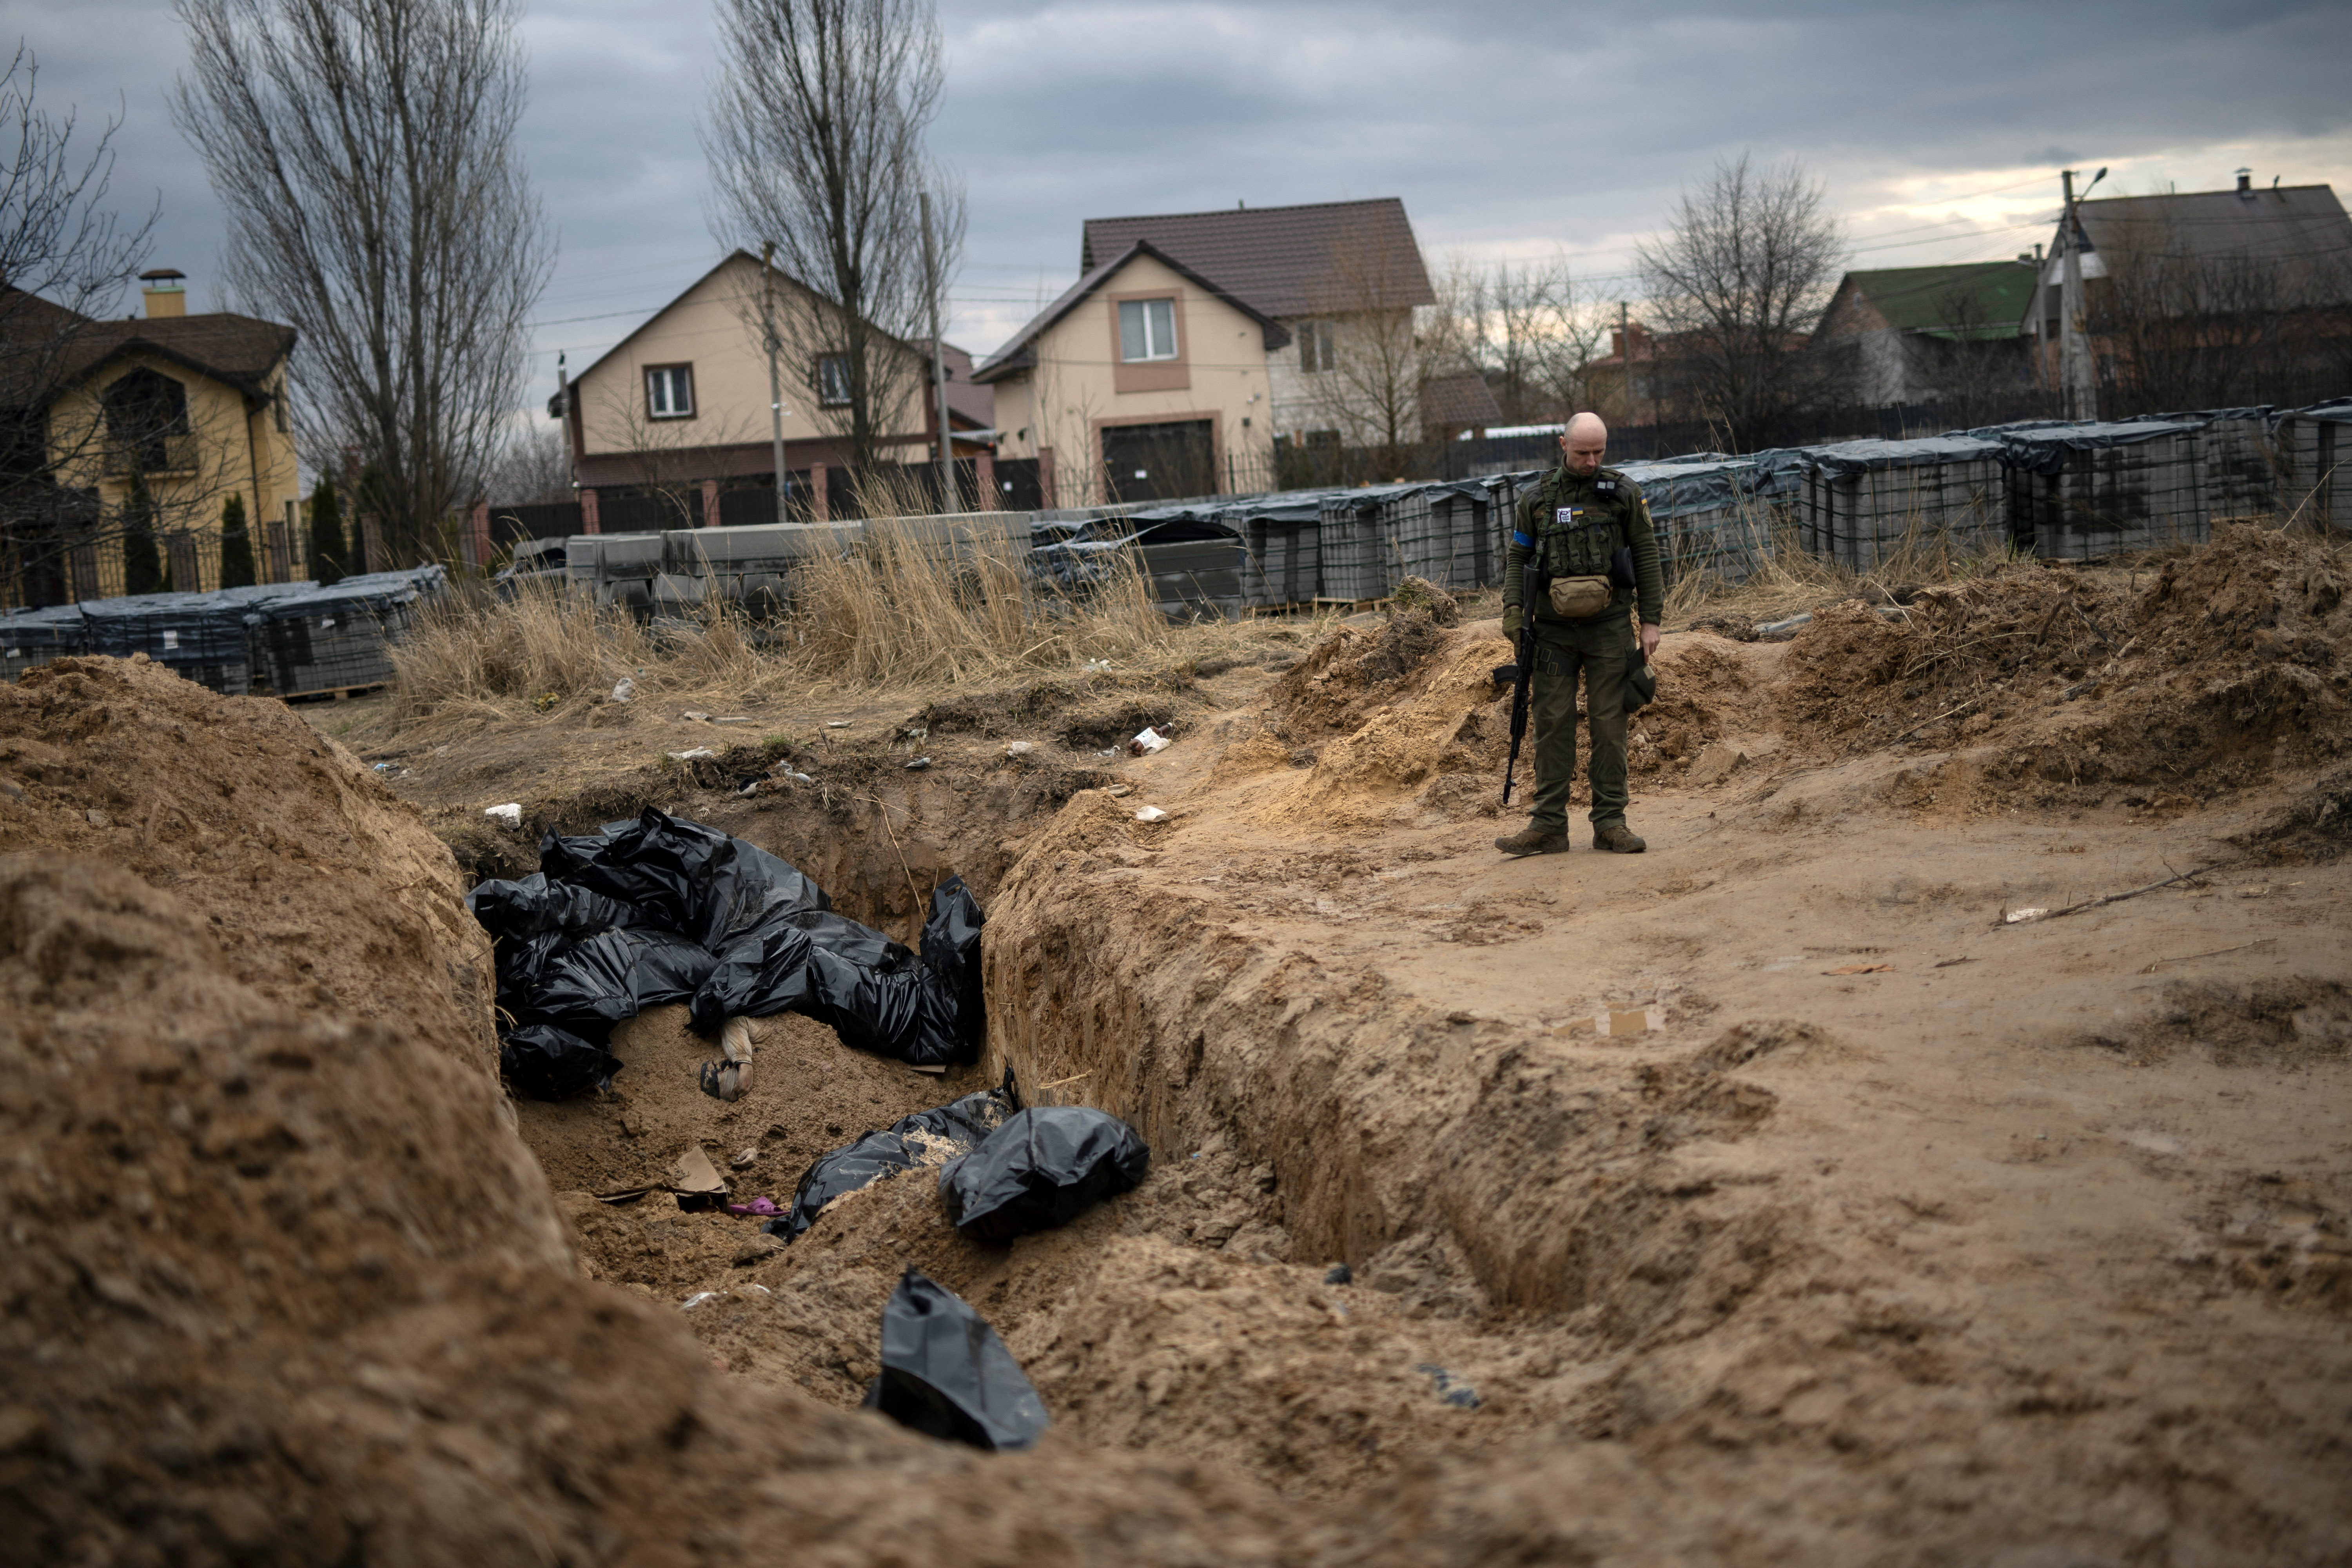 Ukrainian soldier reacts after paying his respects next to a mass grave with bodies of civilians in Bucha